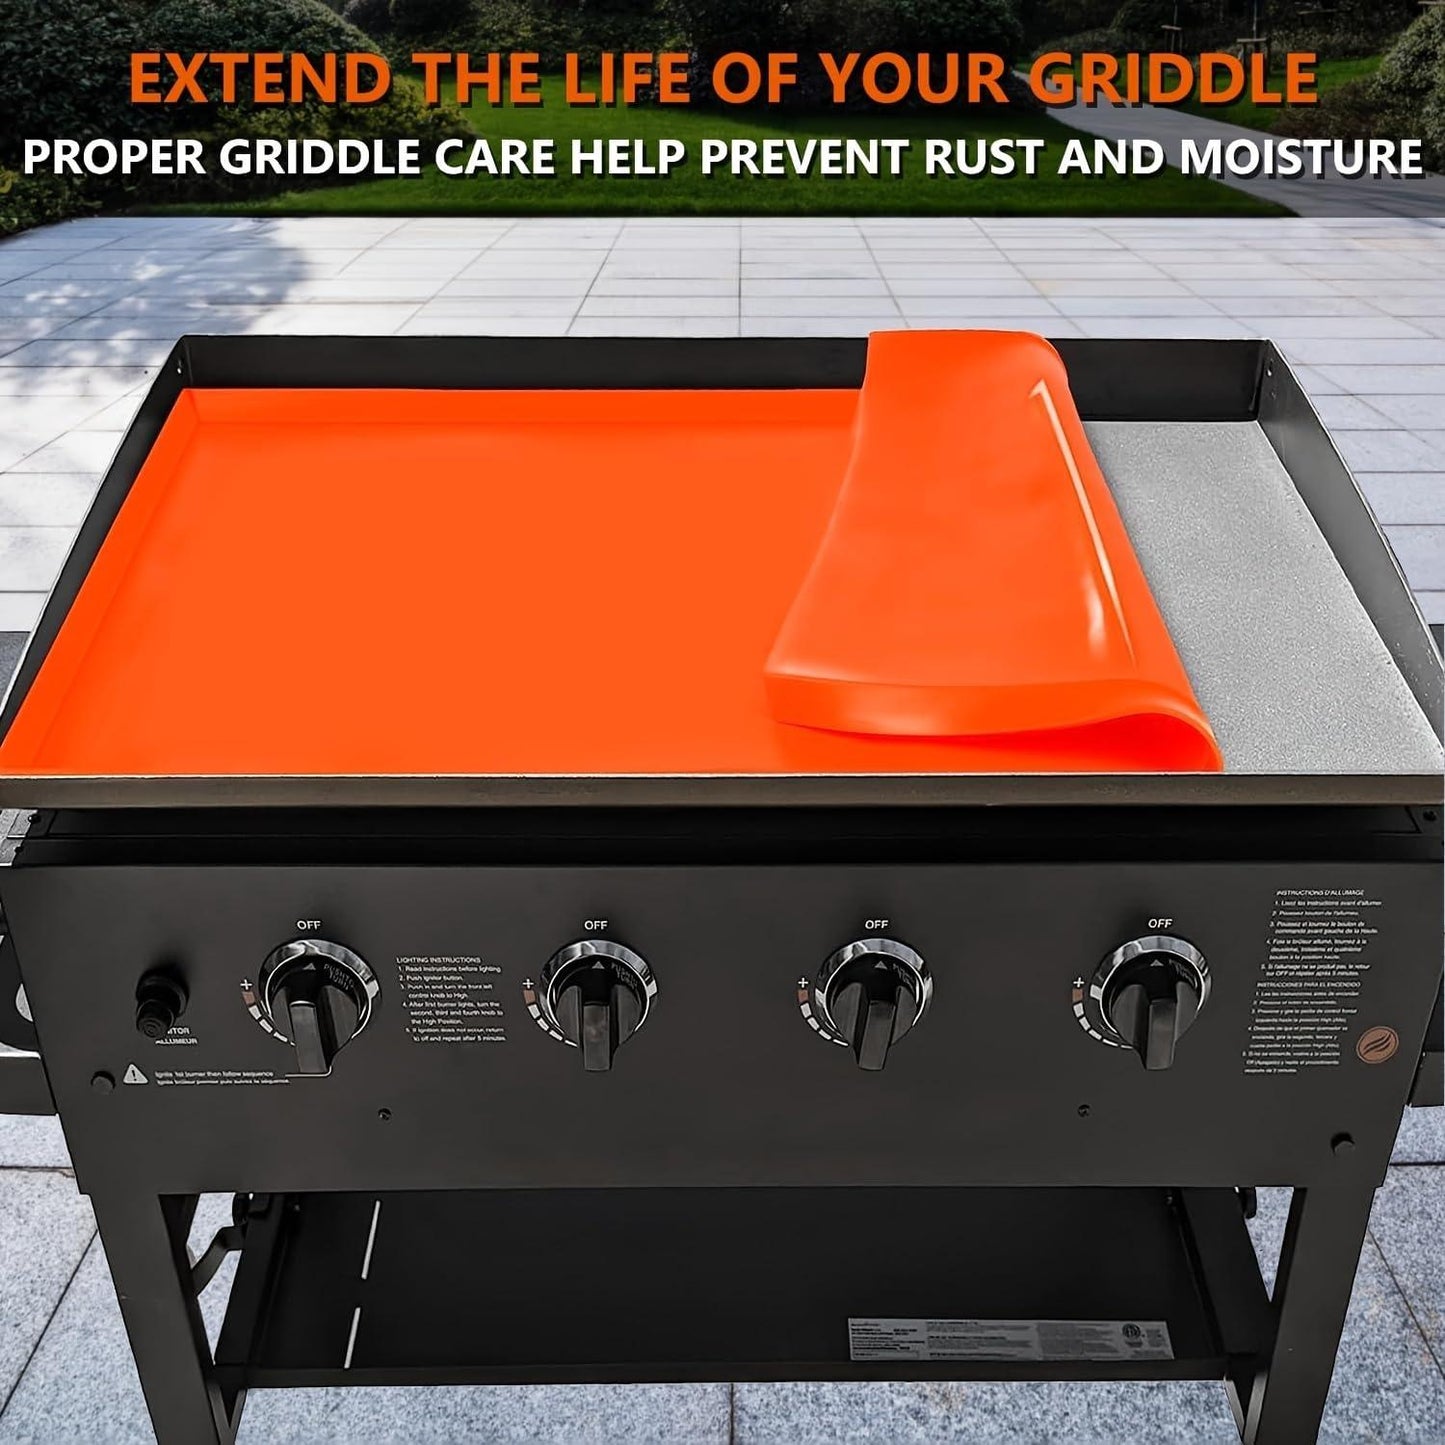 Silicone Griddle Mat for 36" Blackstone Gas Grill Griddle, Heavy Duty & Reusable Griddle Buddy Pad Suitable for Outdoor Barbecue Griddle, BBQ Tools Accessories Protective Cover (Orange, 36 IN) - CookCave